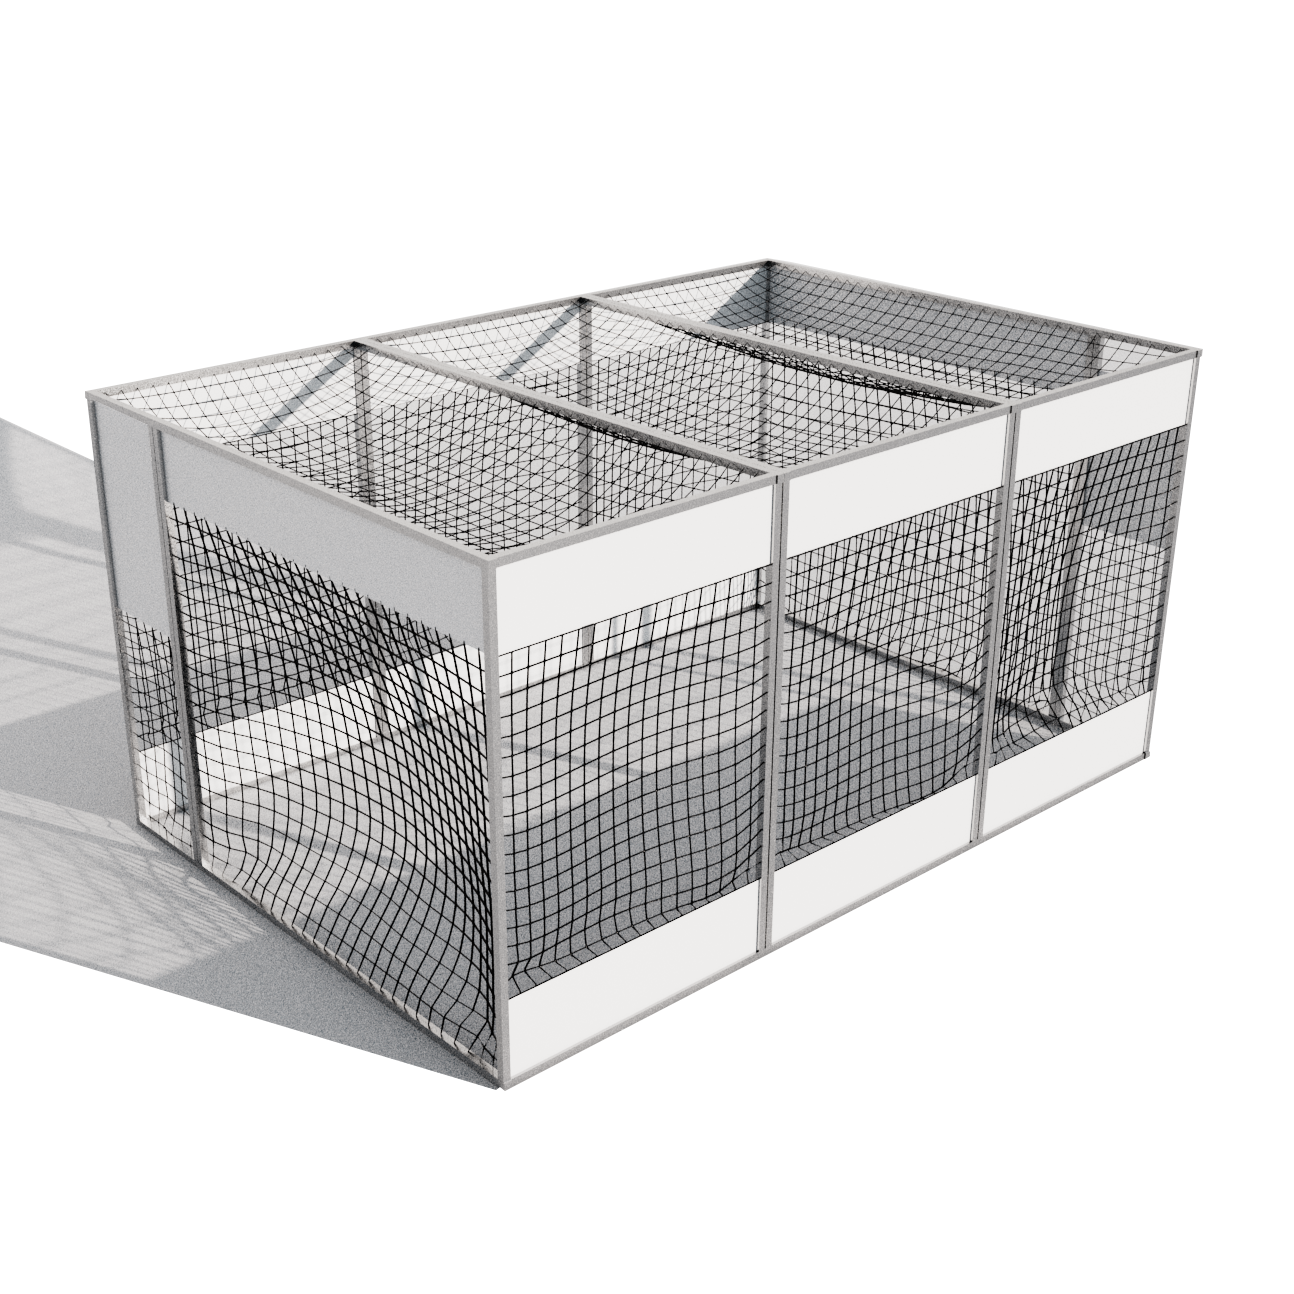 Aluminum Arena for skyball games